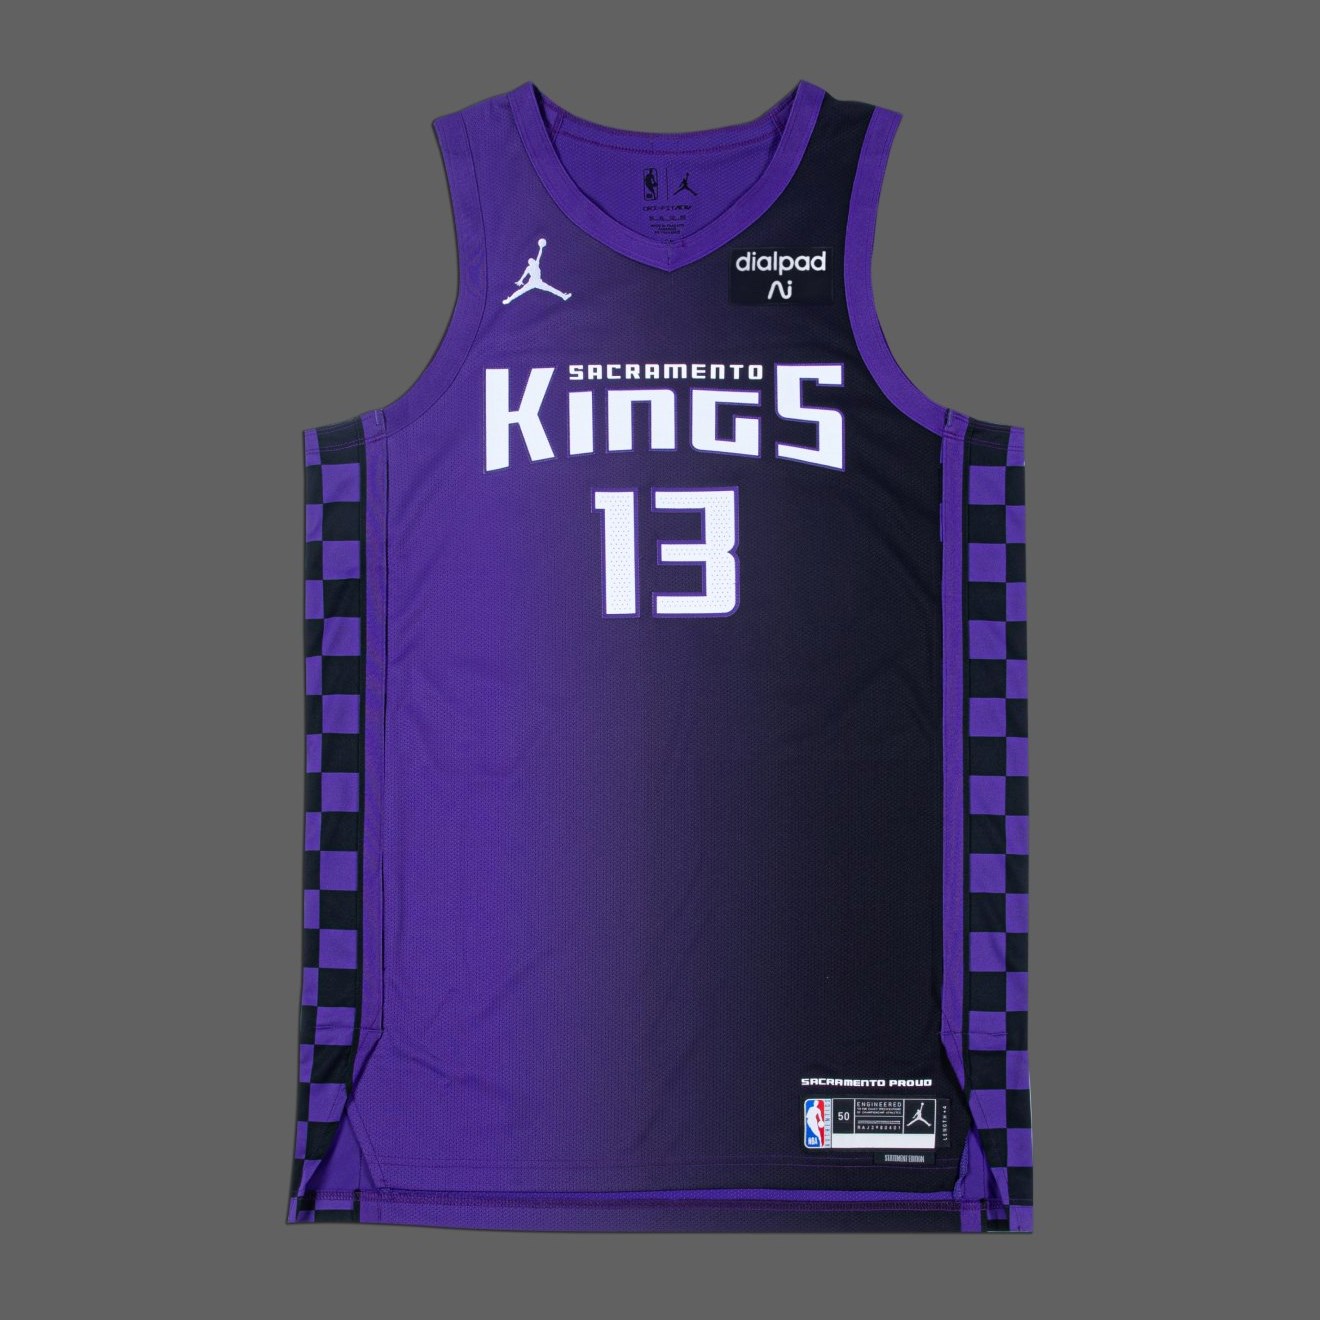 Sacramento Kings' 'City Edition' uniforms pays homage to the